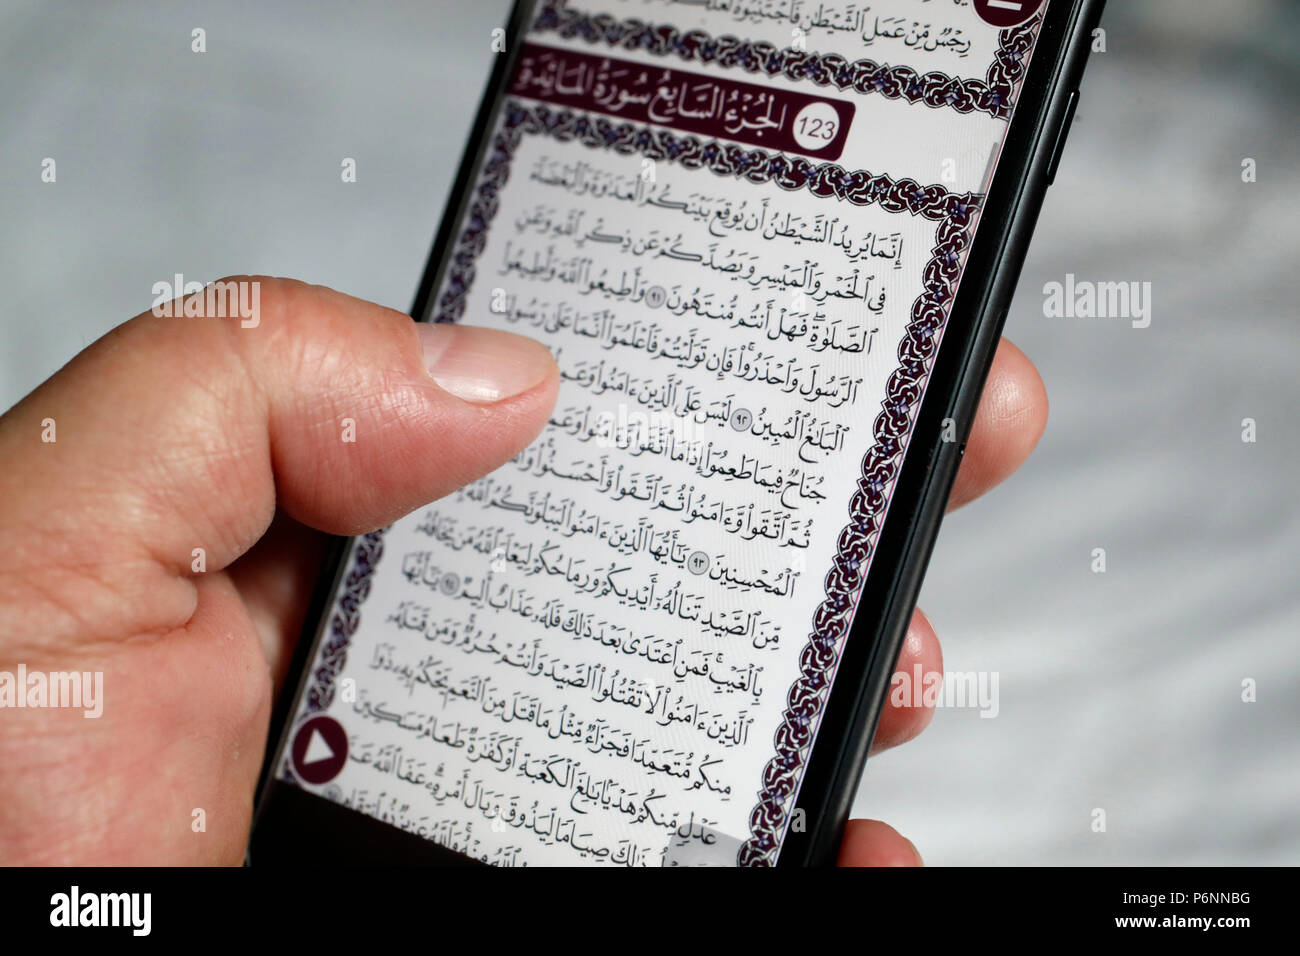 Man reading an electronic Quran on a smartphone. Stock Photo